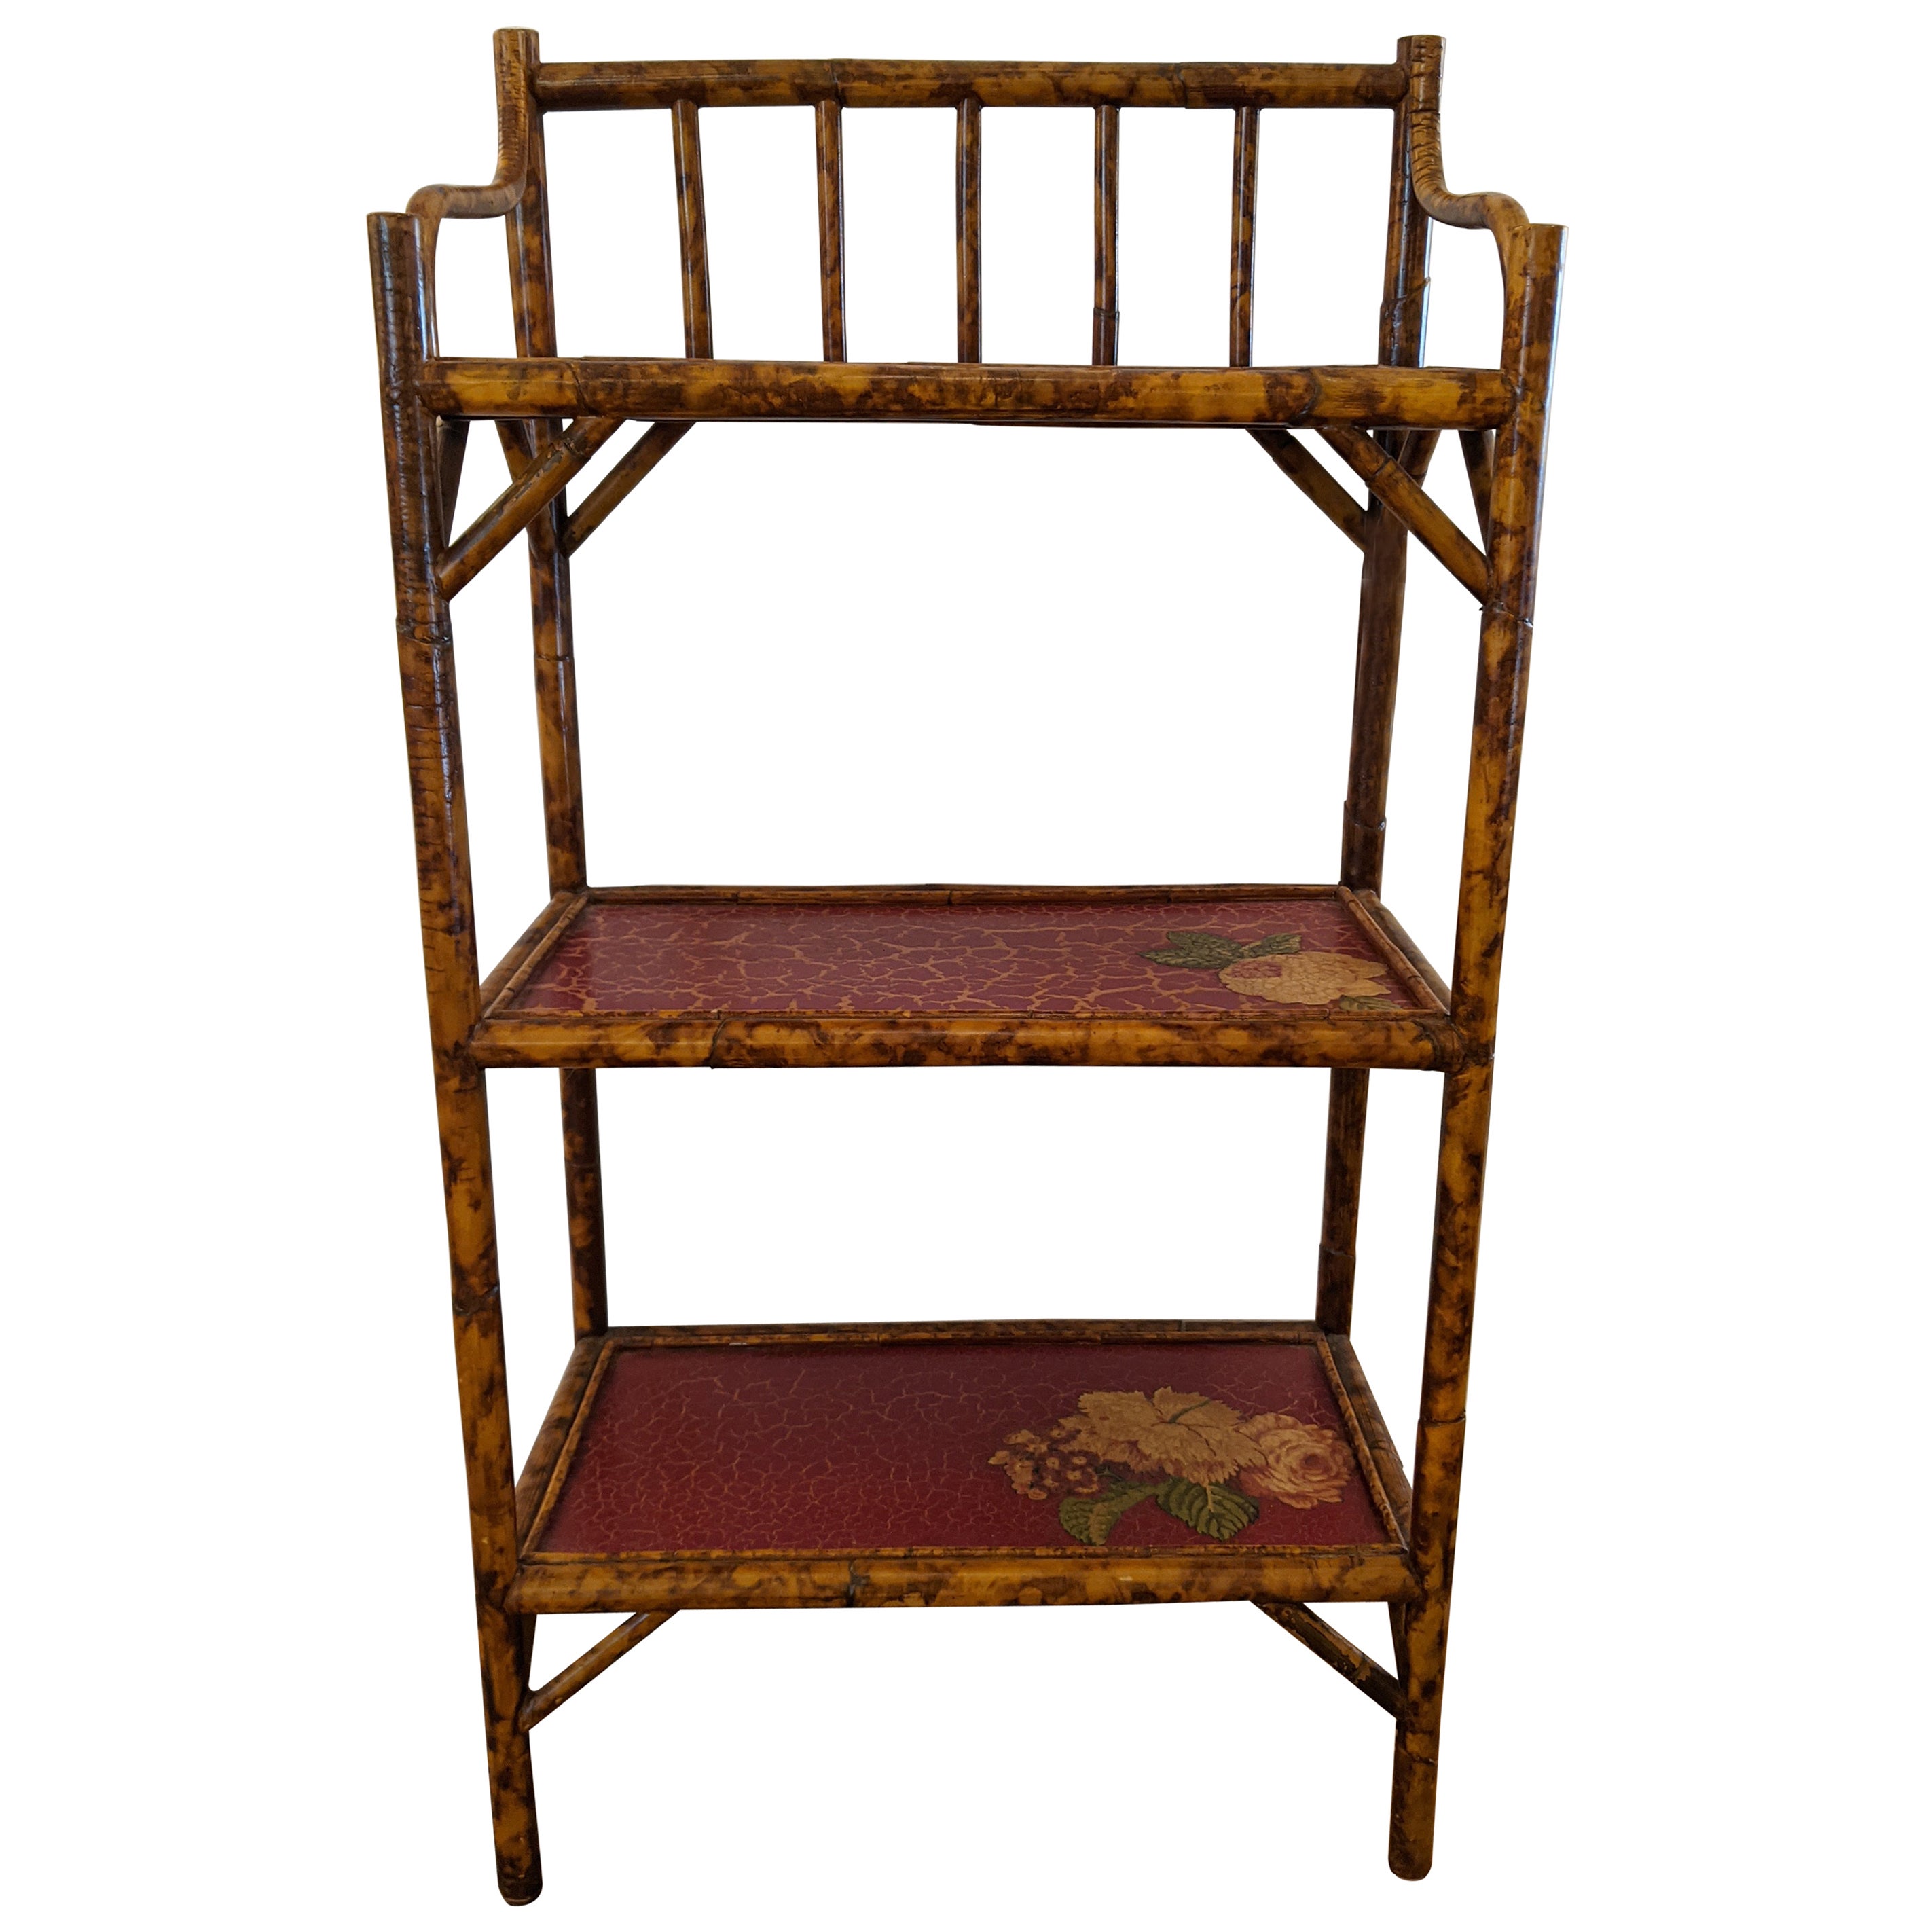 Lovely 3 Tier Vintage Bamboo Shelving Unit with Faux Painted Shelves For Sale